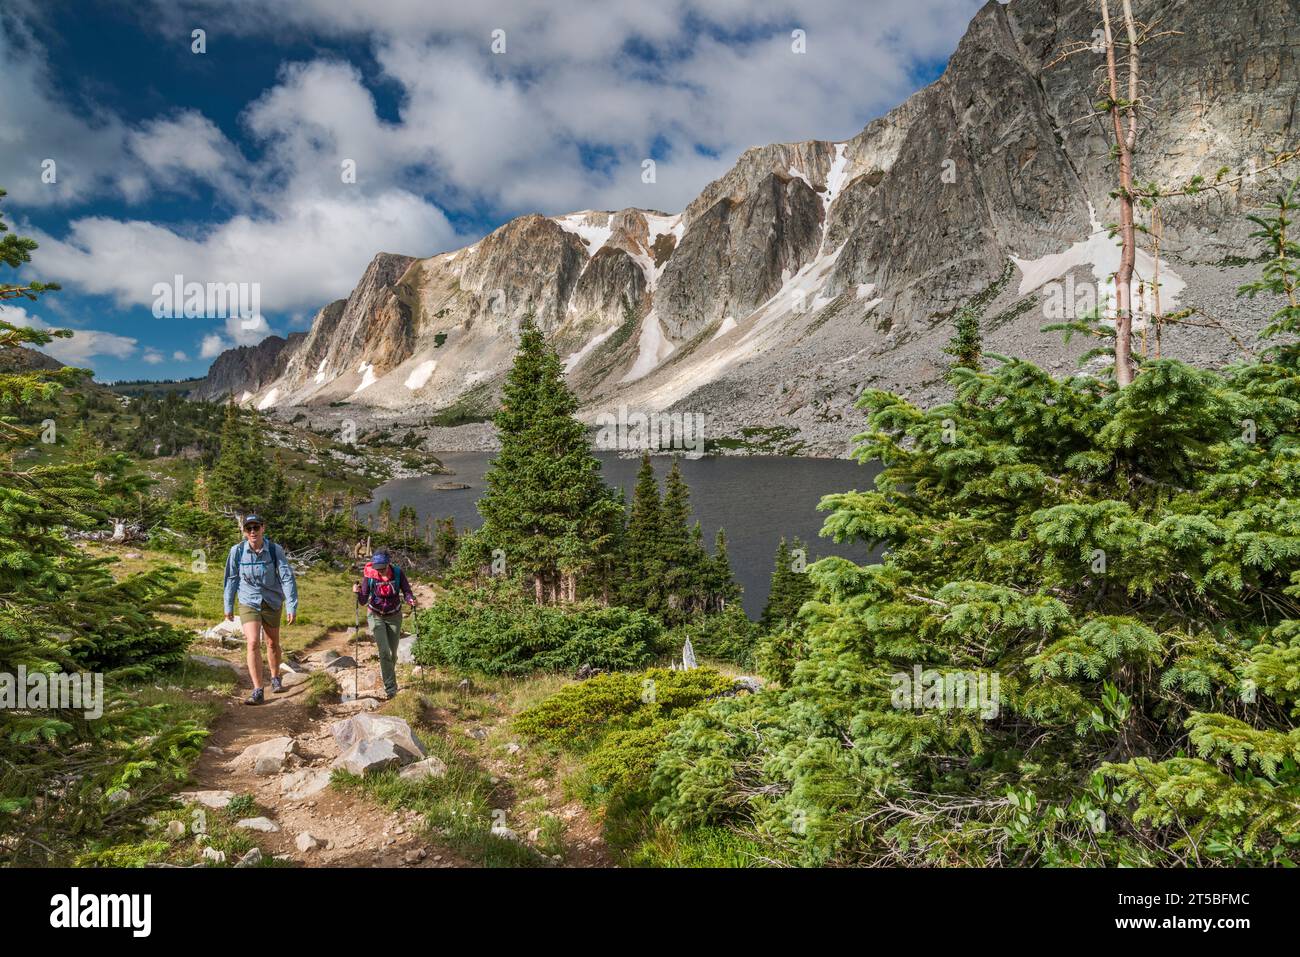 Snowy Range, Lookout Lake, Wanderer auf dem Lakes Trail, Mittsommer, Medicine Bow Mountains, Rocky Mountains, Medicine Bow National Forest, Wyoming, USA Stockfoto